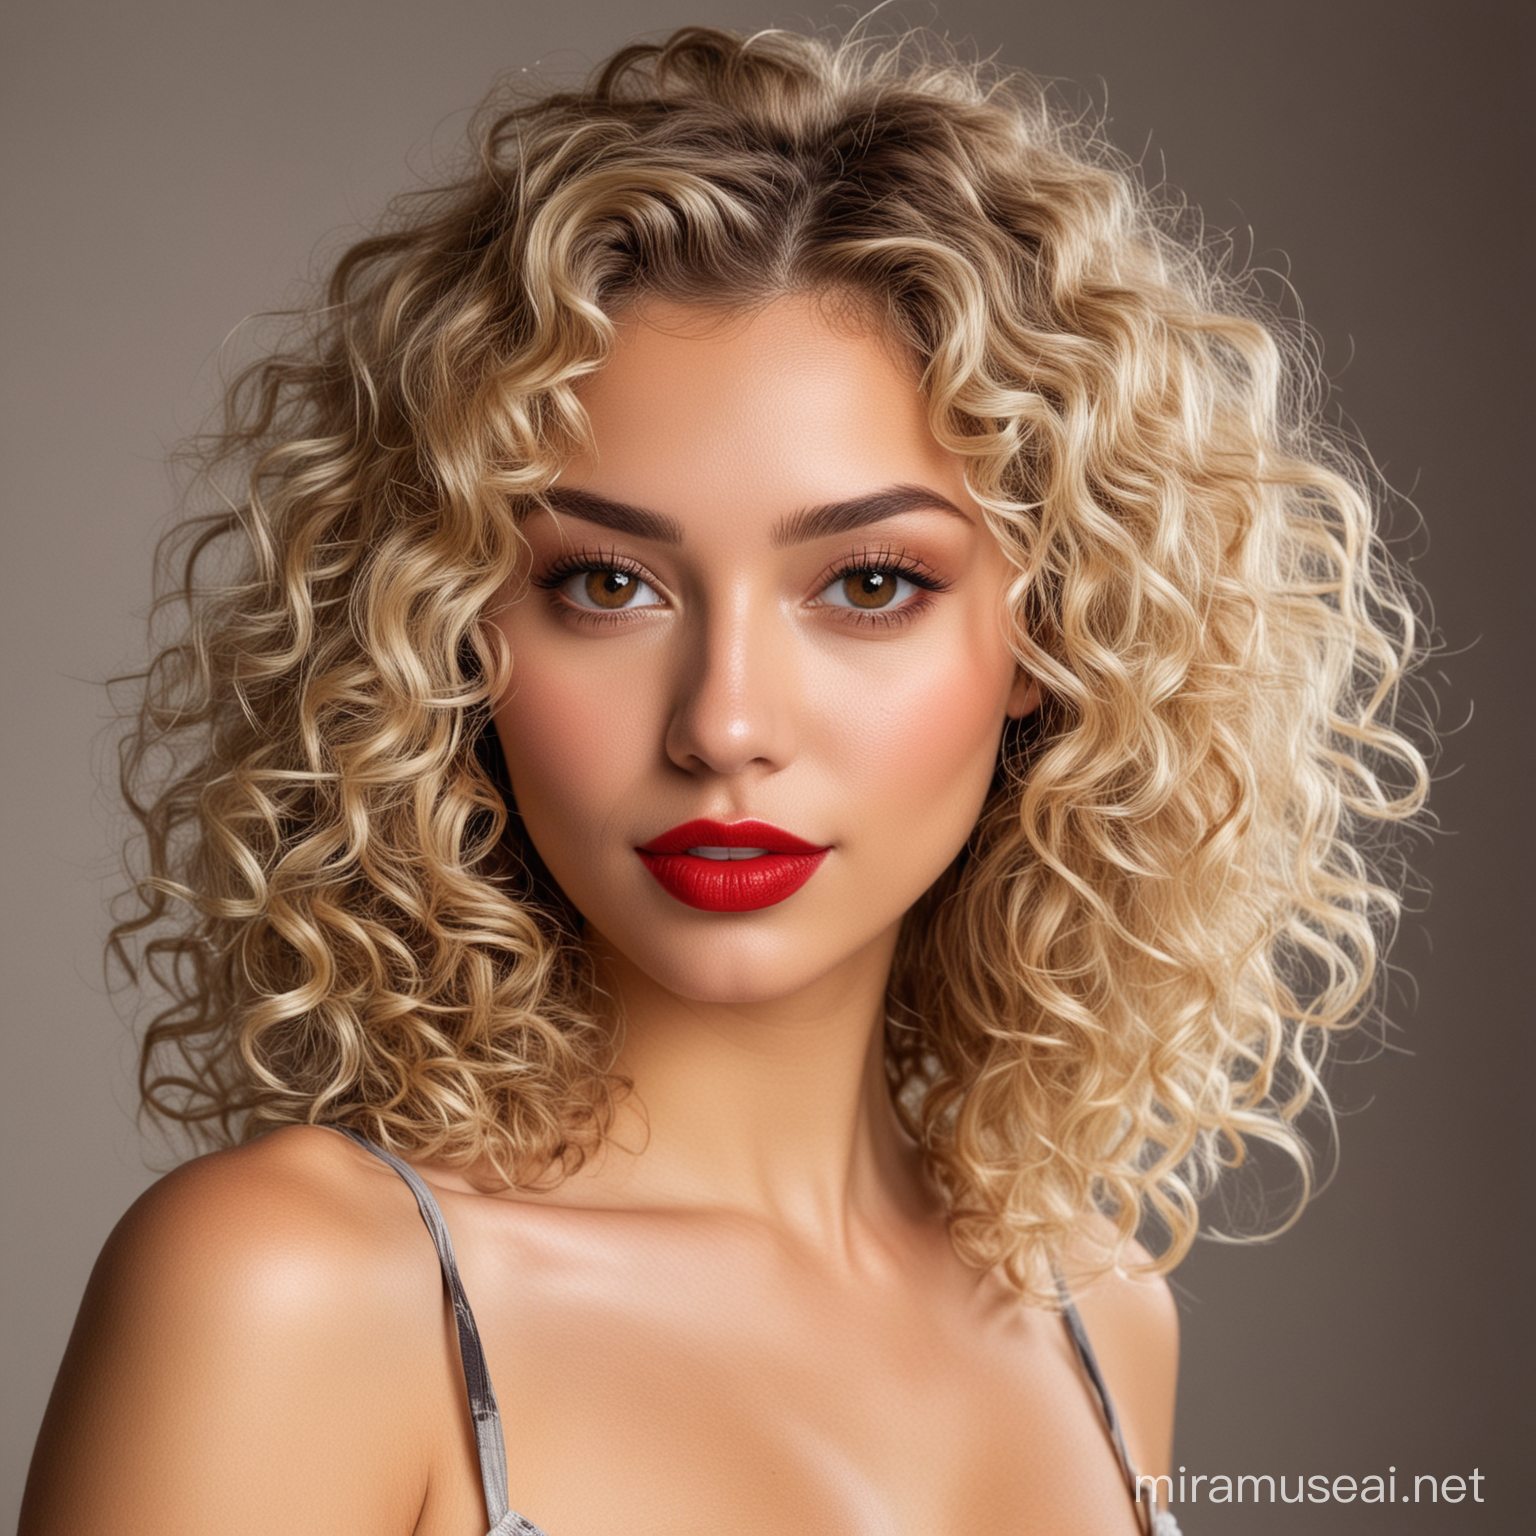 Elegant Blonde Woman with Red Lipstick and Brown Eyes